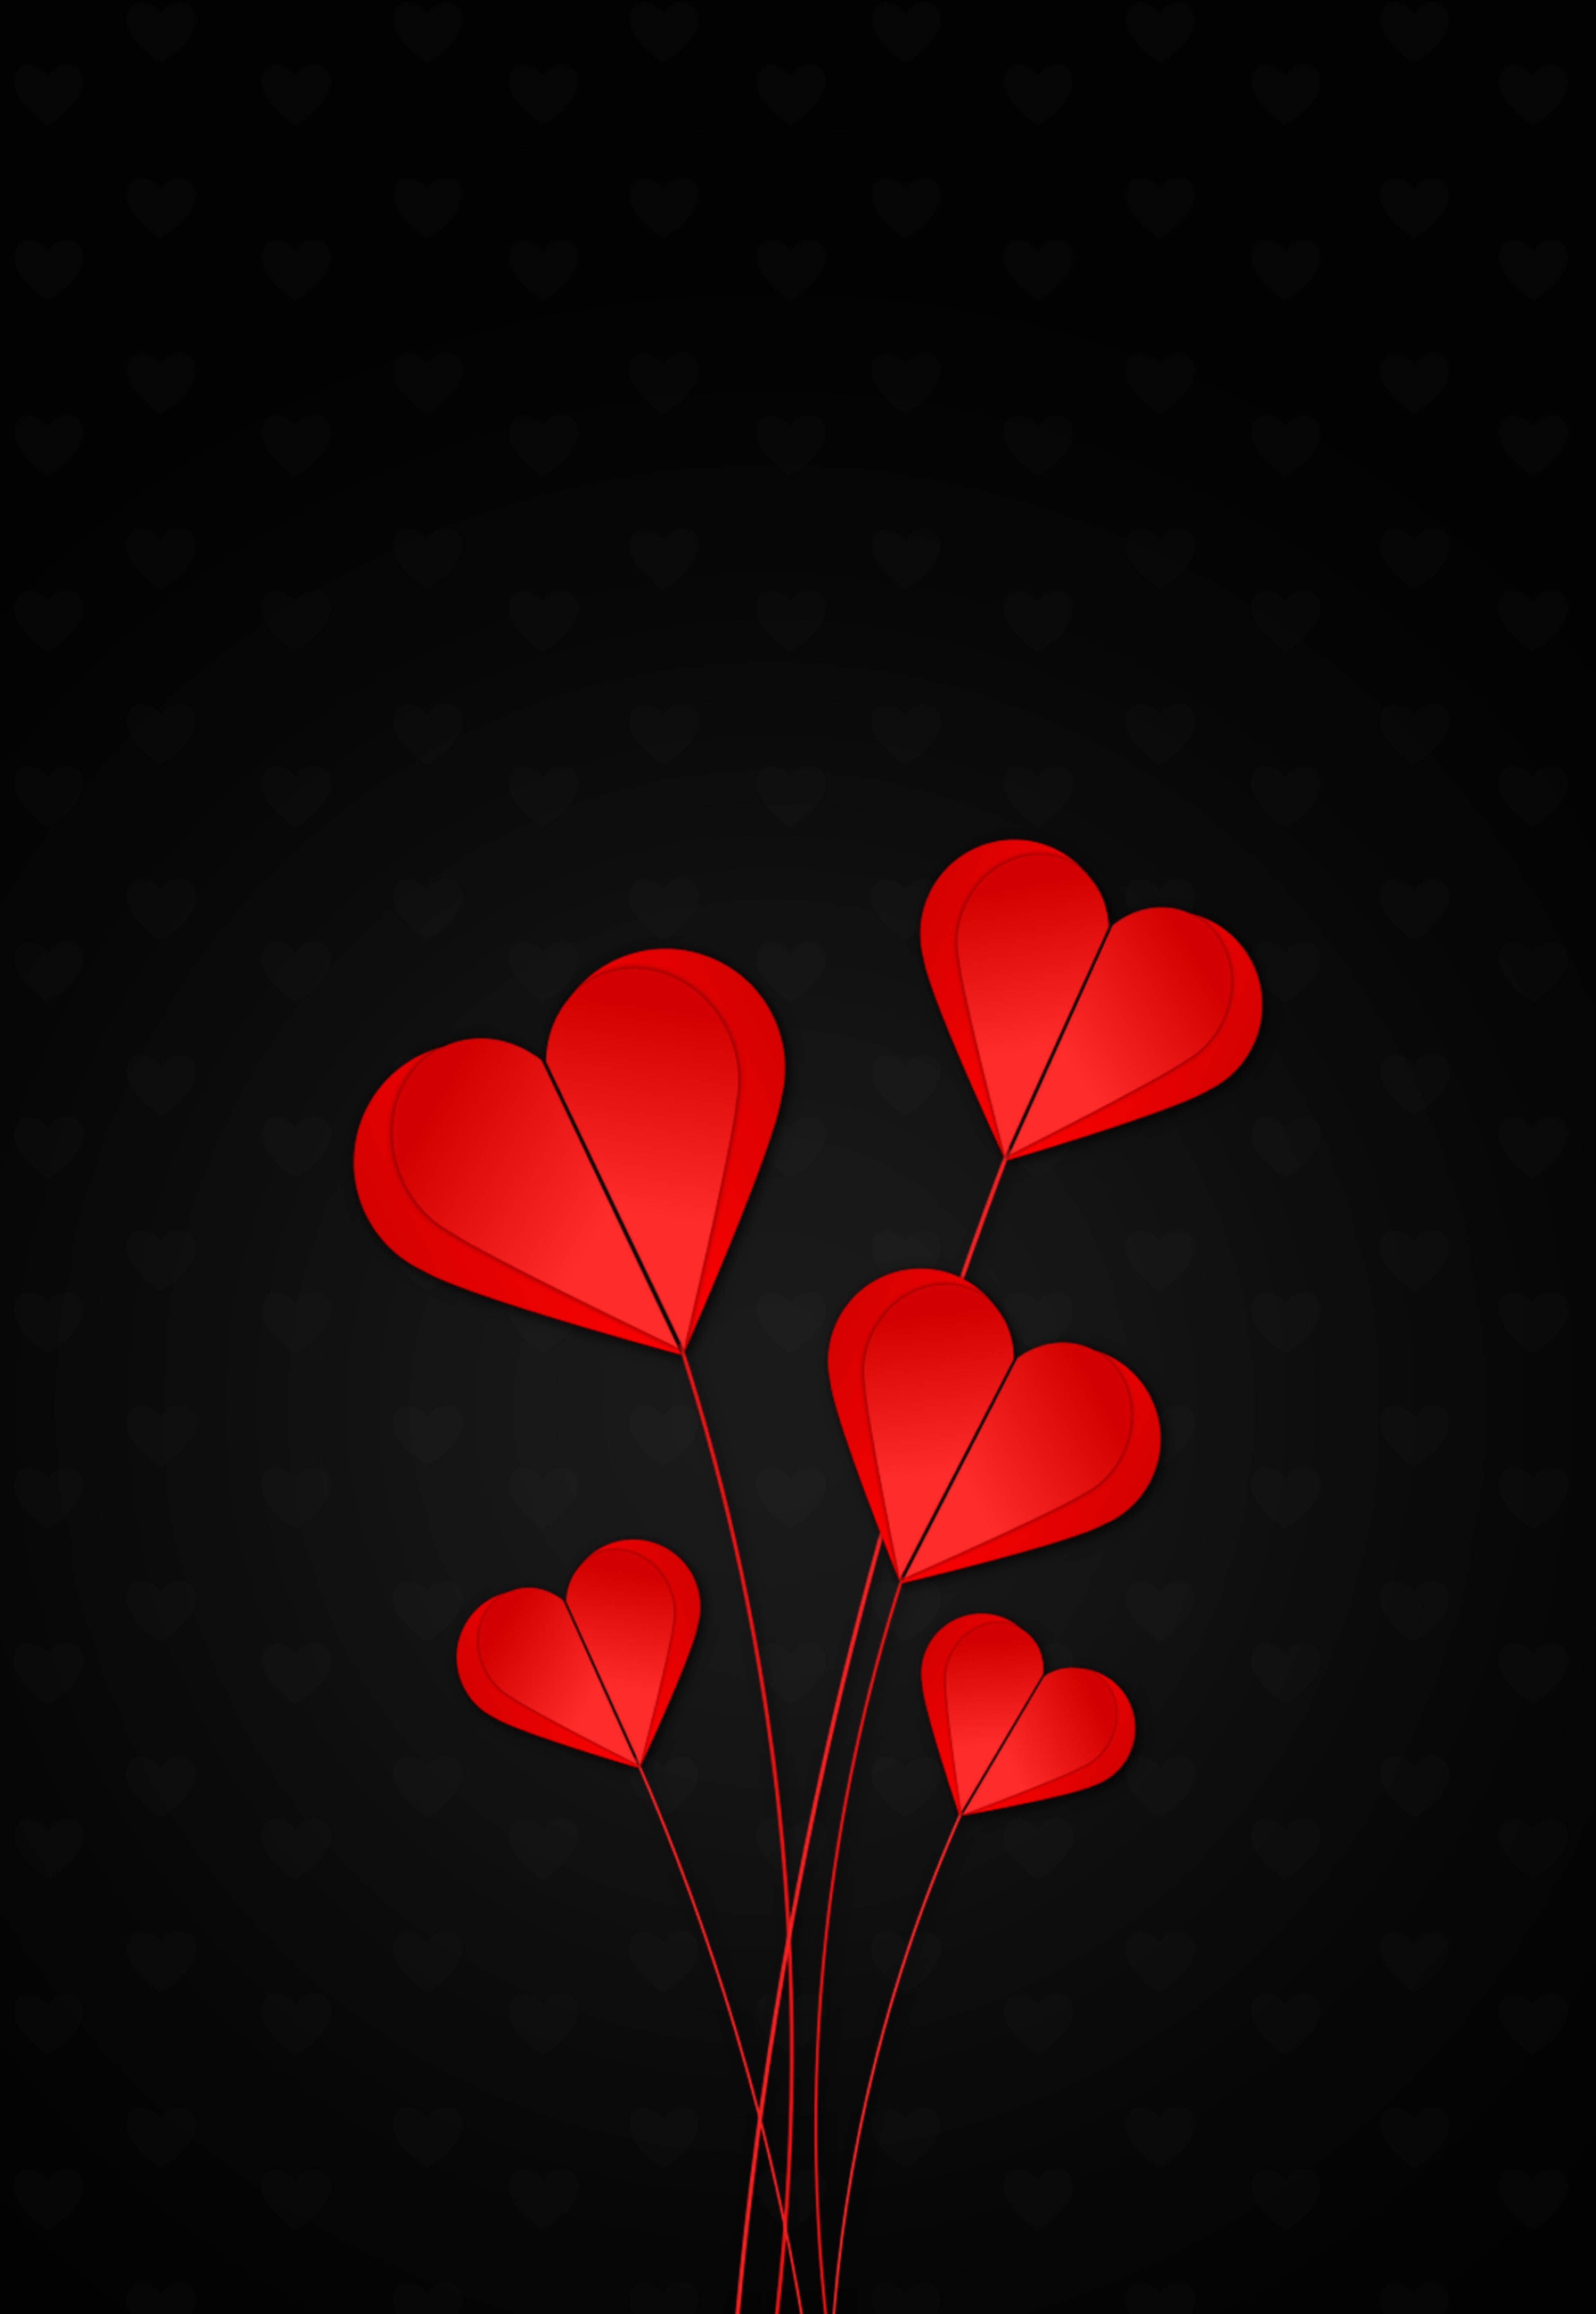 hearts, black background, love, red Full HD